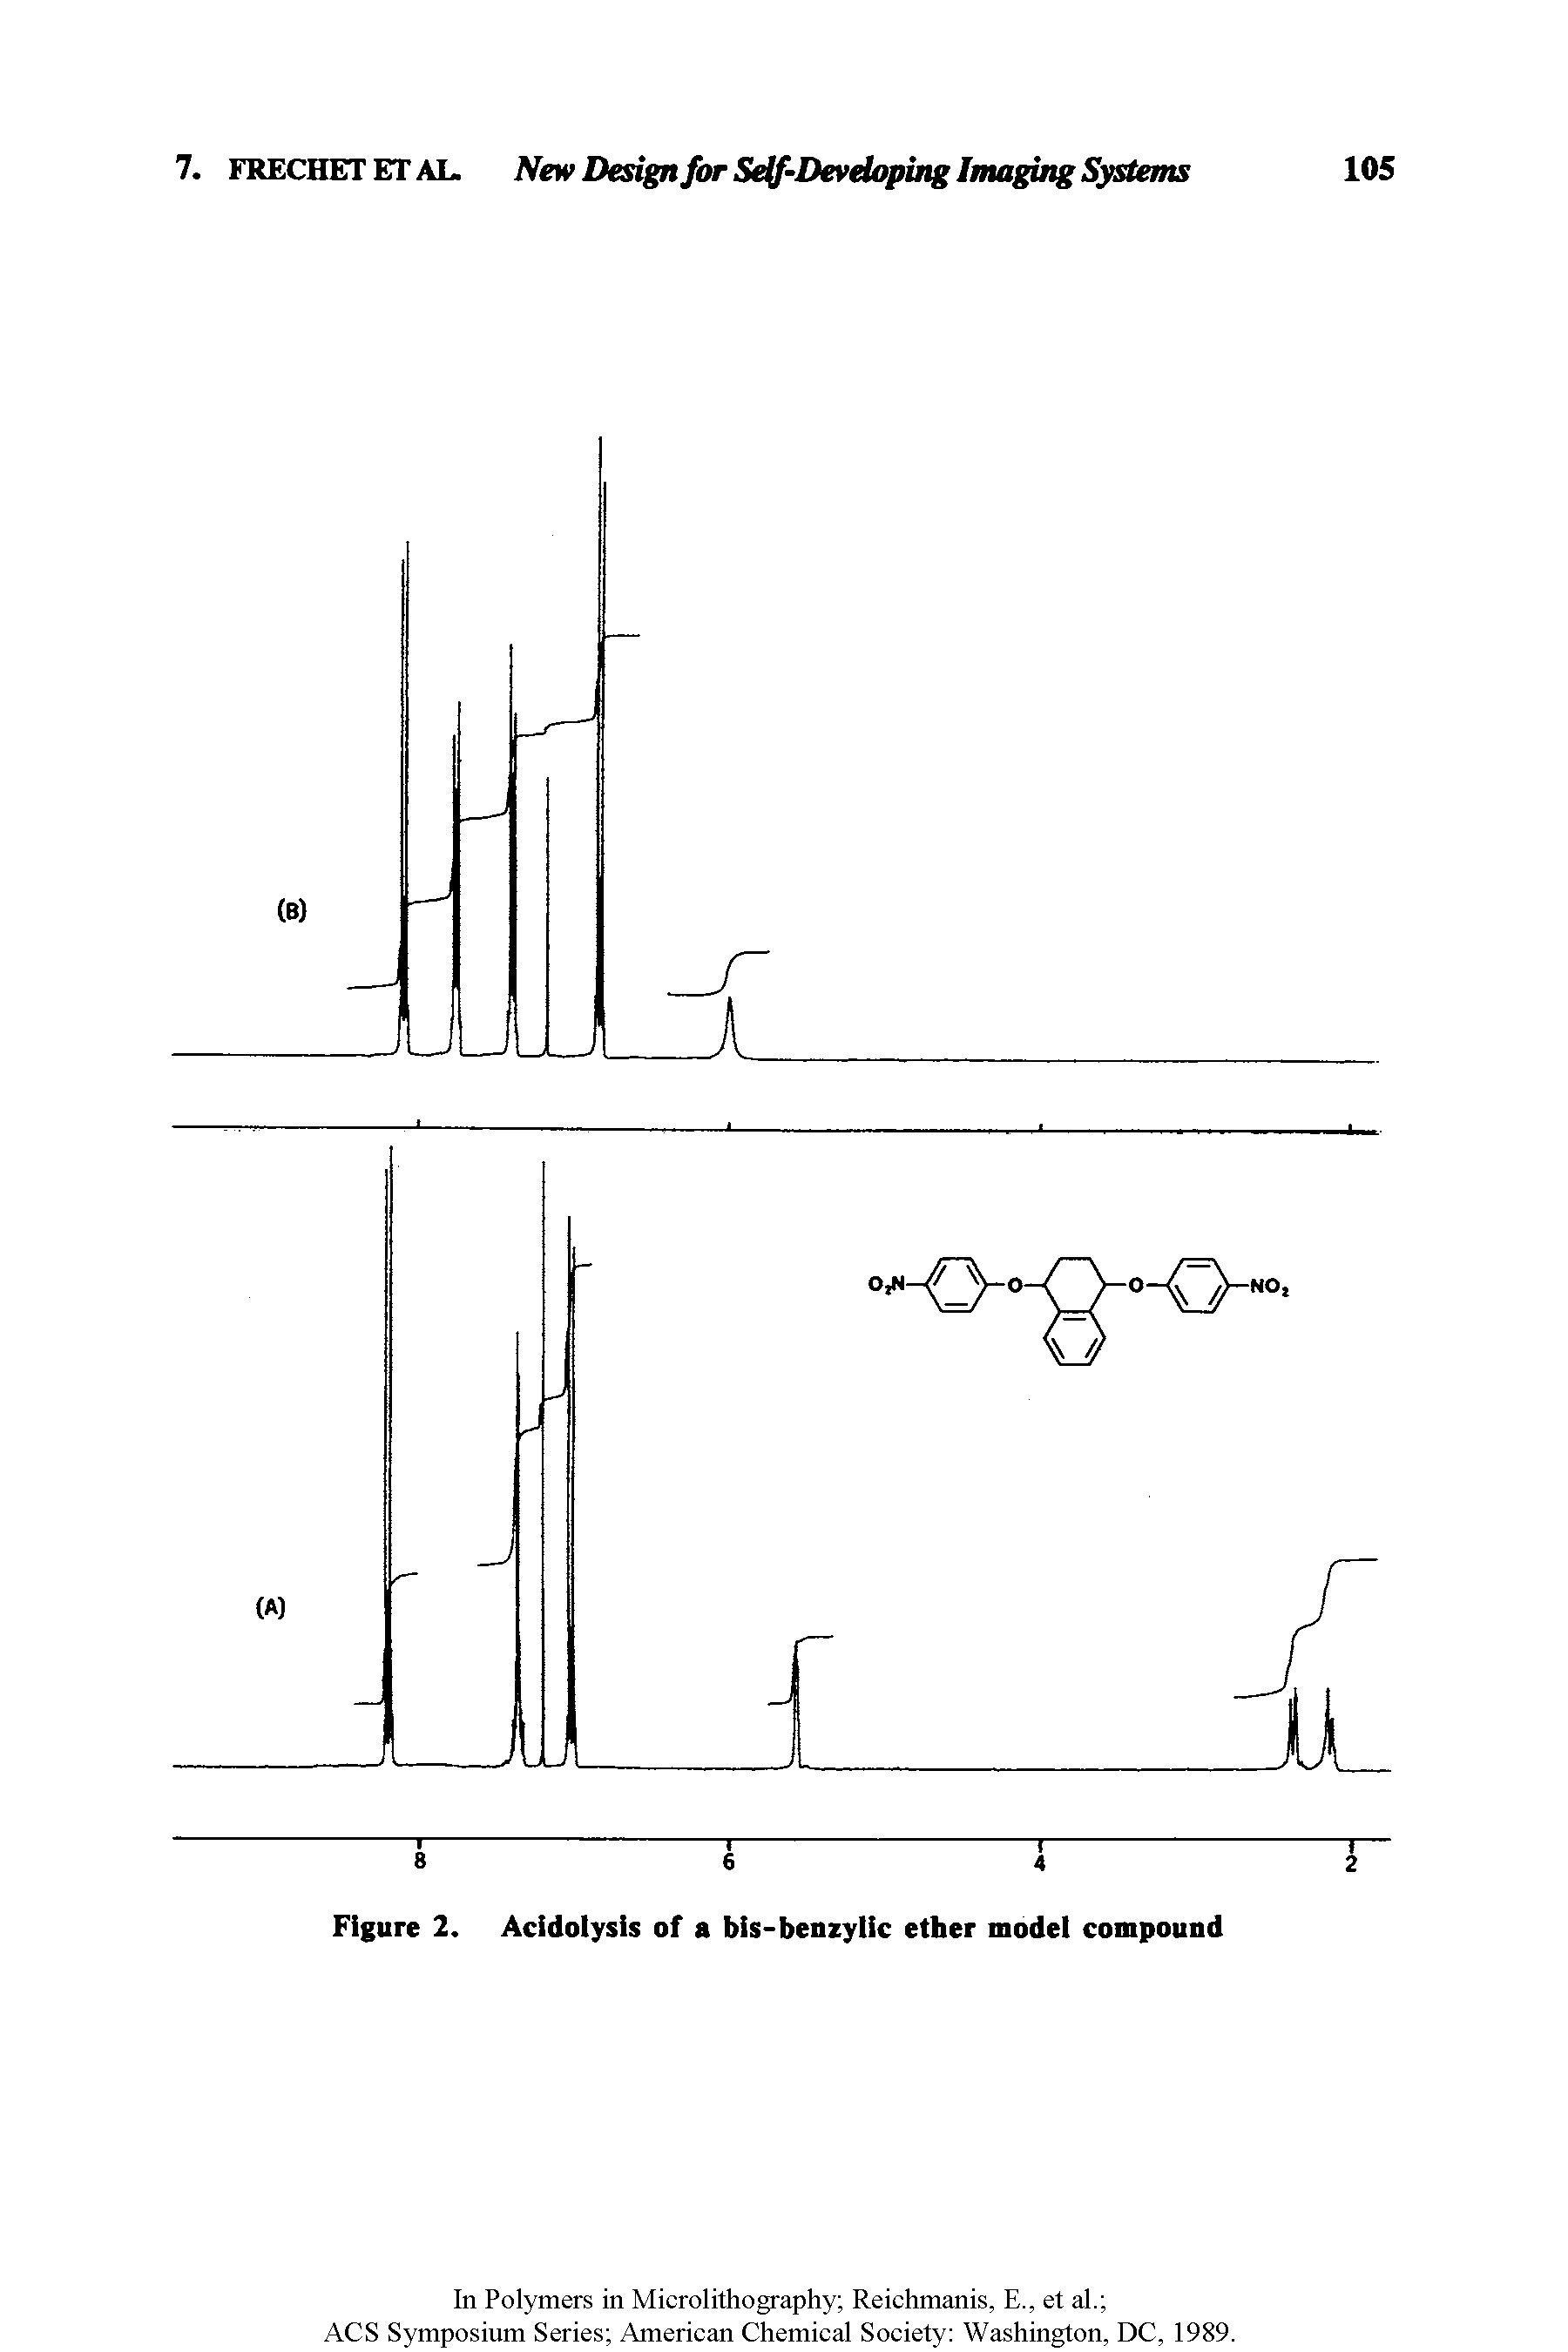 Figure 2. Acidolysis of a bis-benzylic ether model compound...